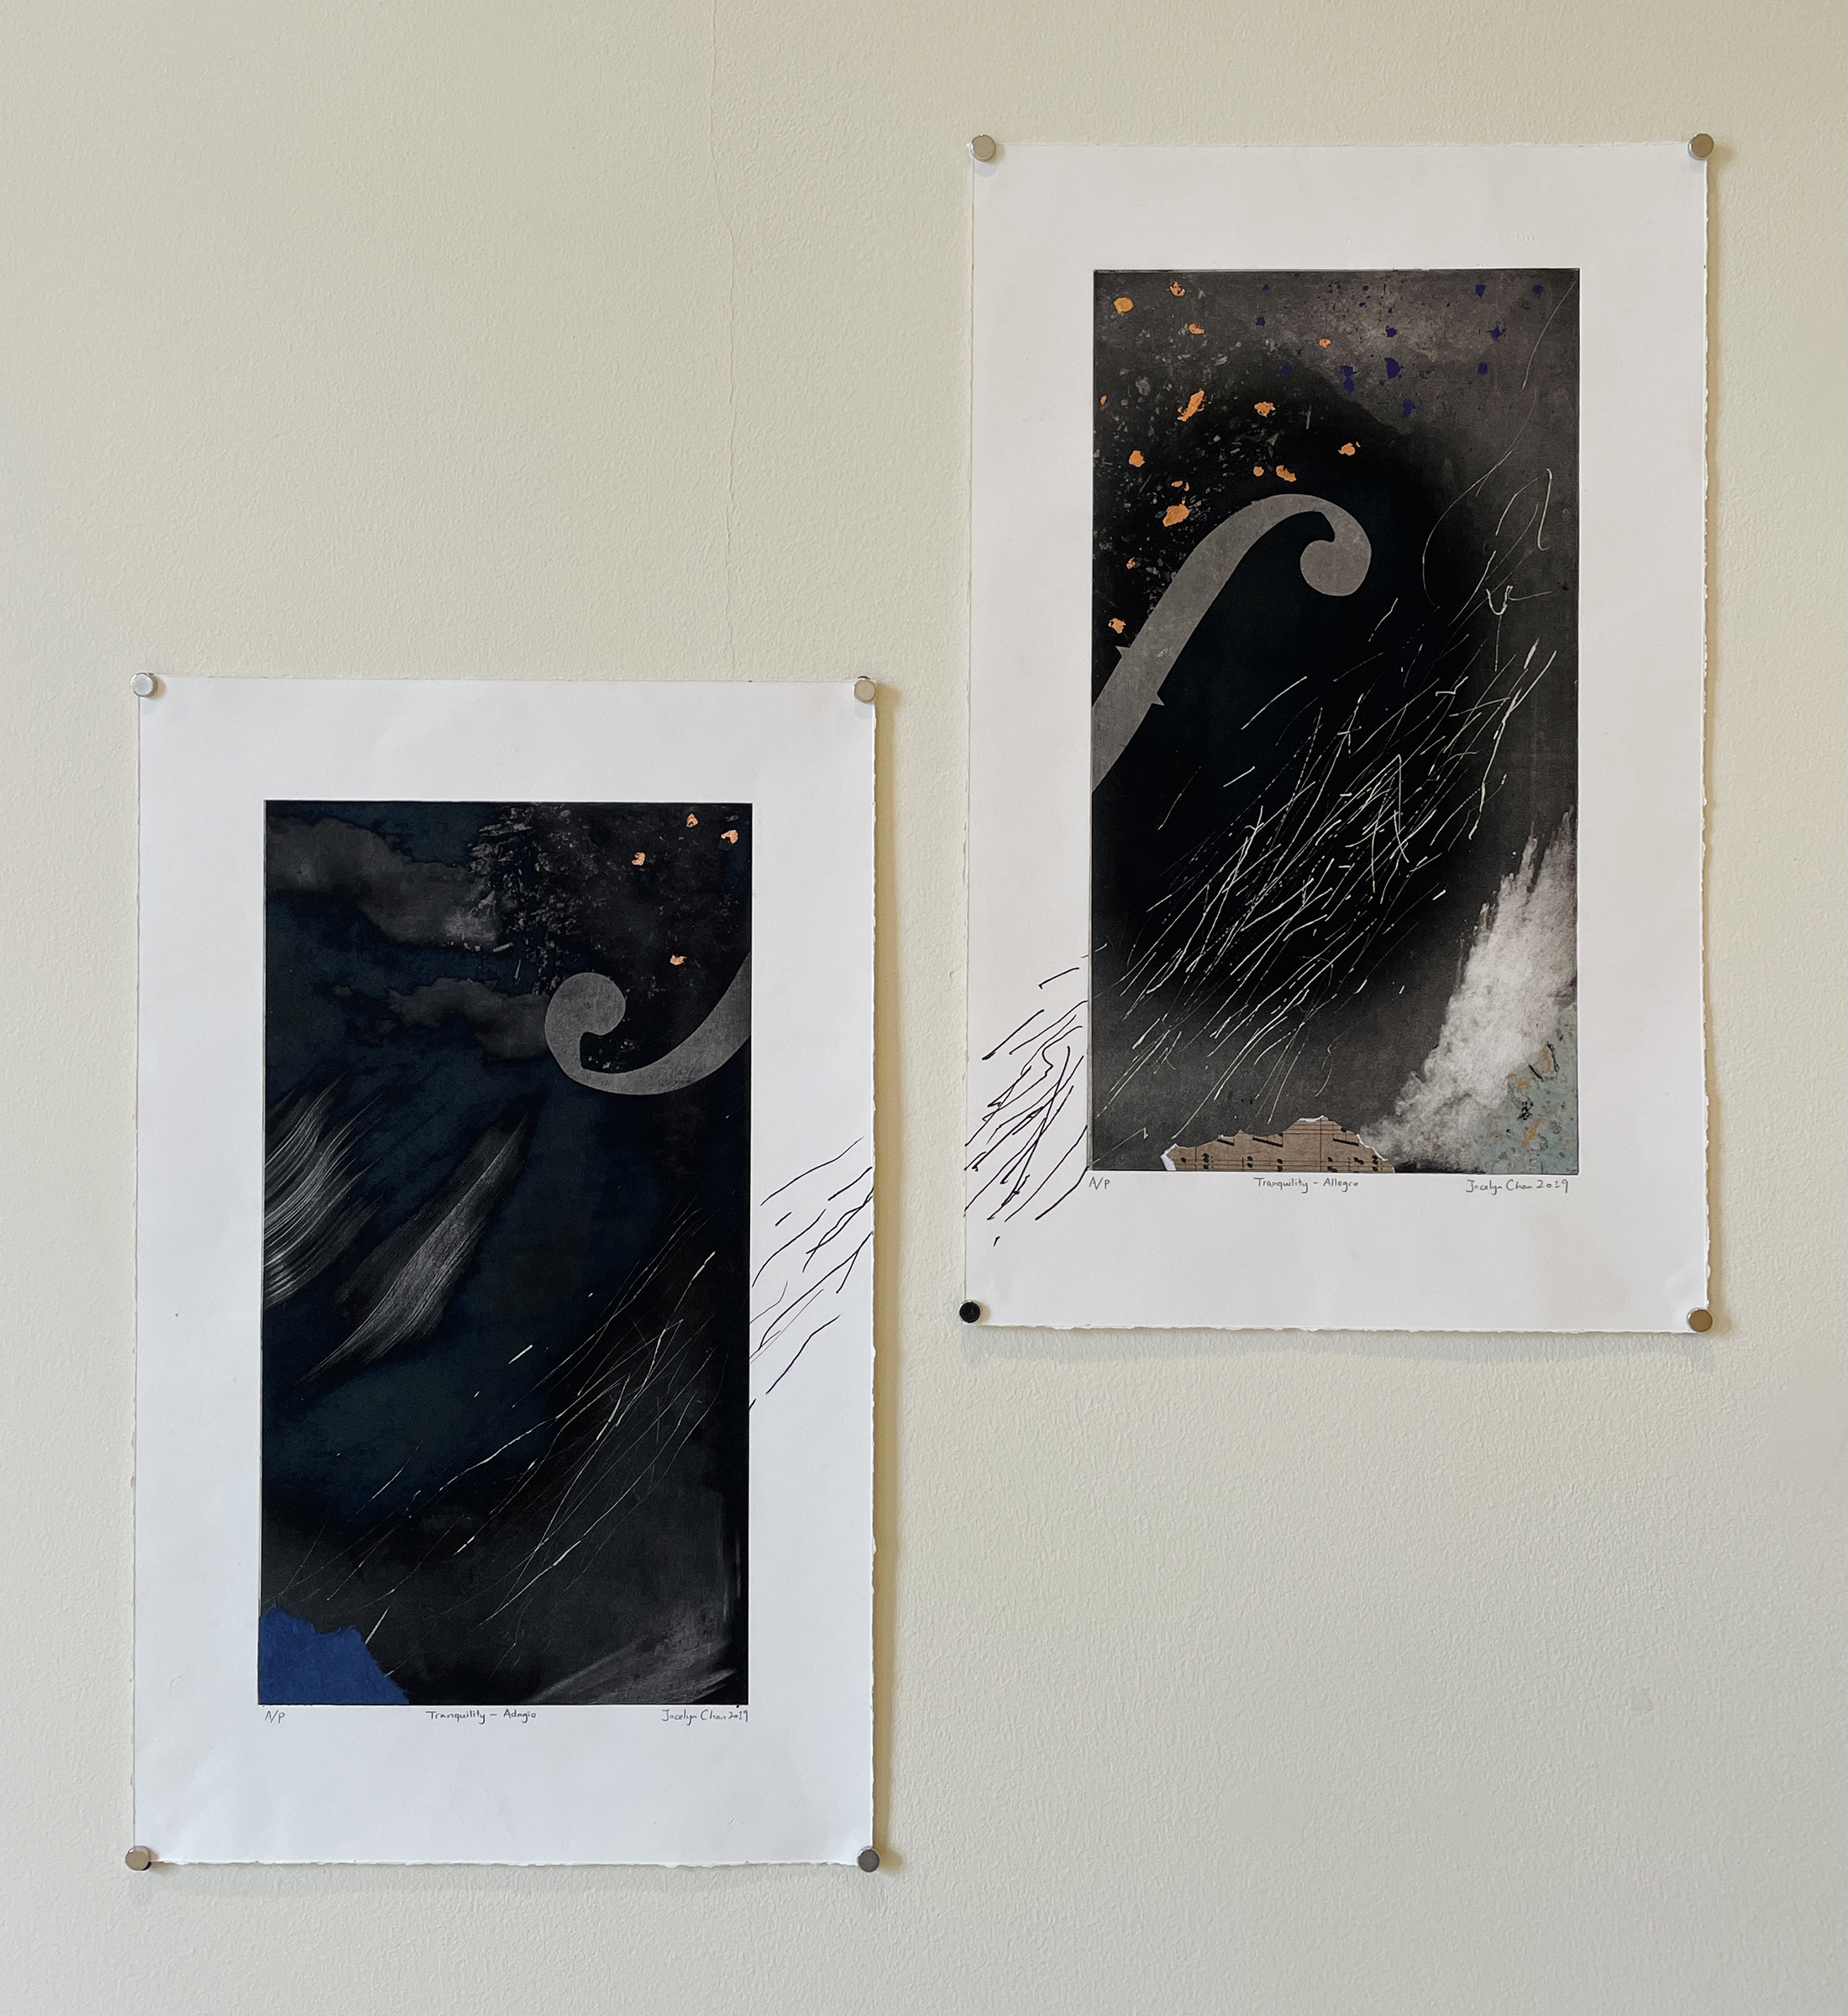 Tranquility - Adagio (left) & Allegro (right), digital printmaking & collage by Jocelyn Chan.